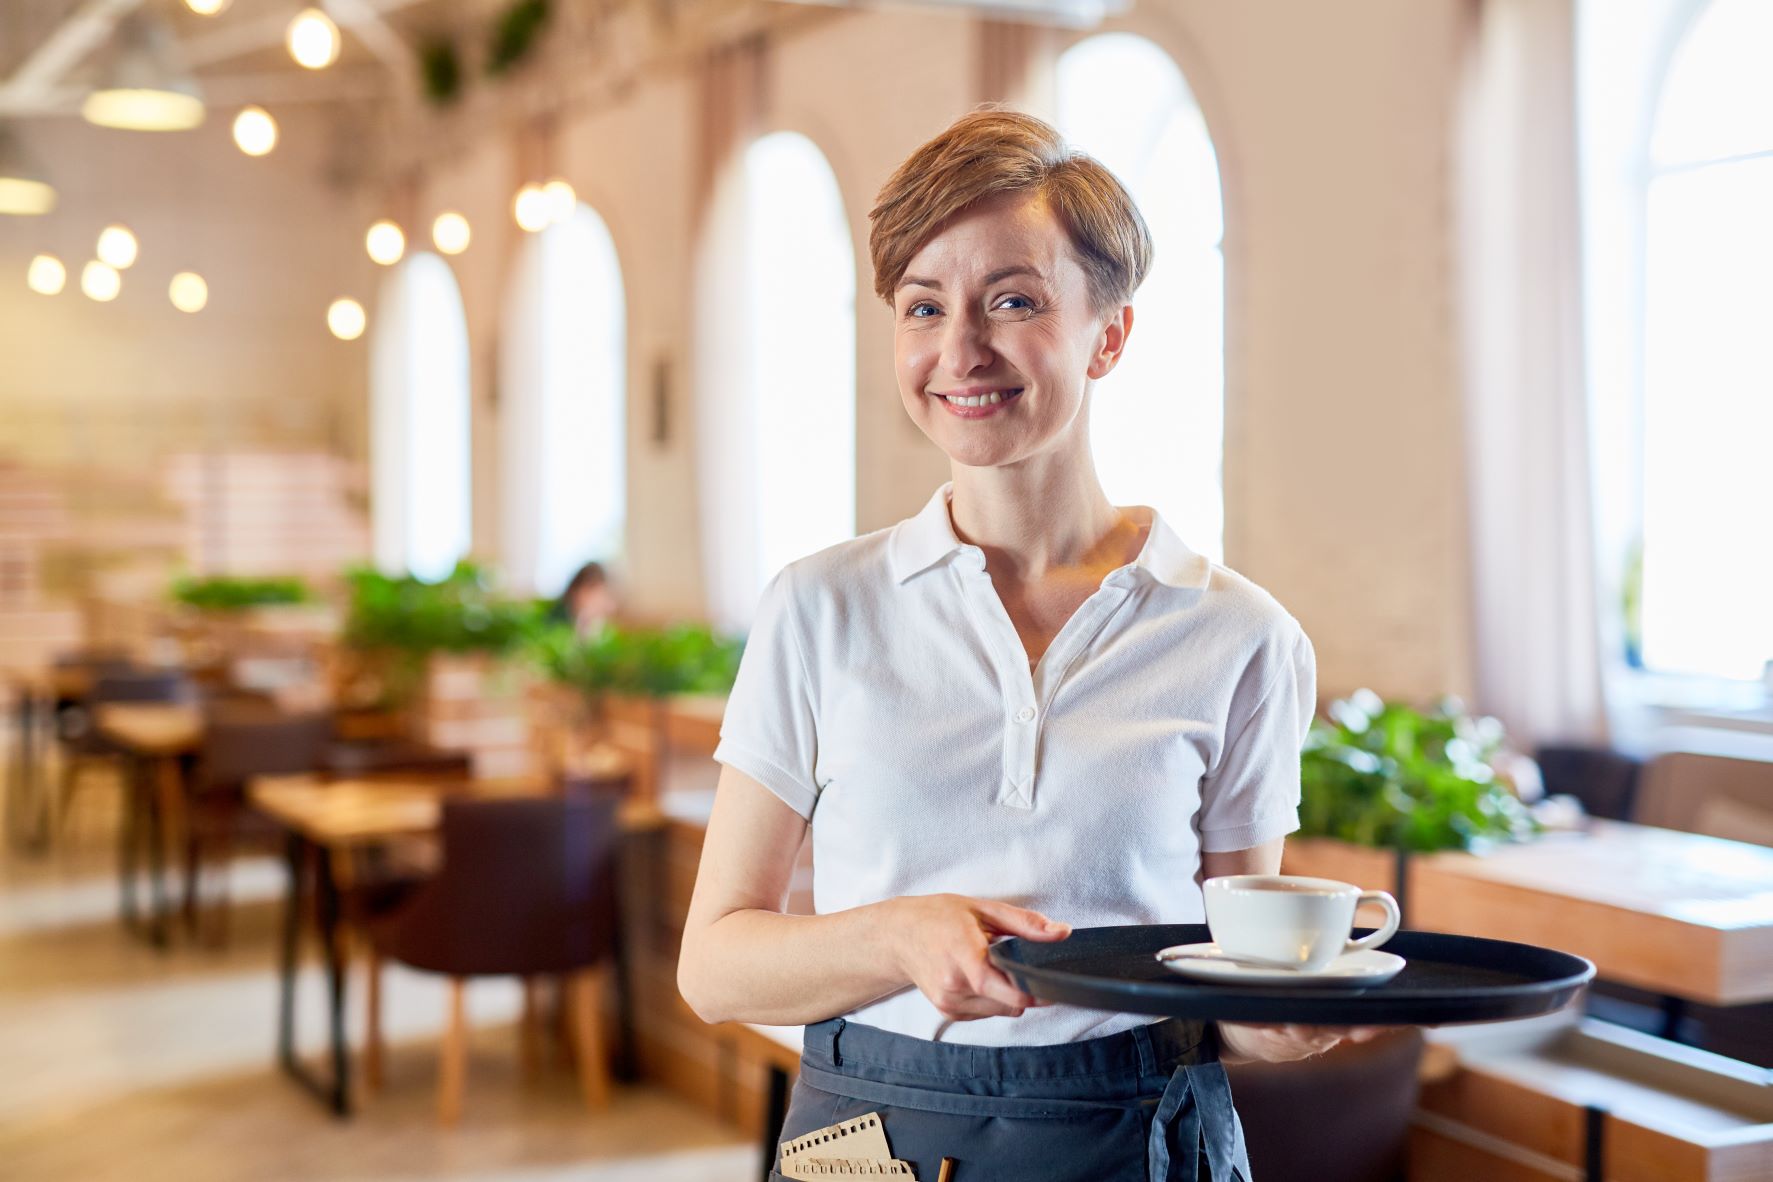 Engage With and Retain Restaurant Guests Before They Lose Interest